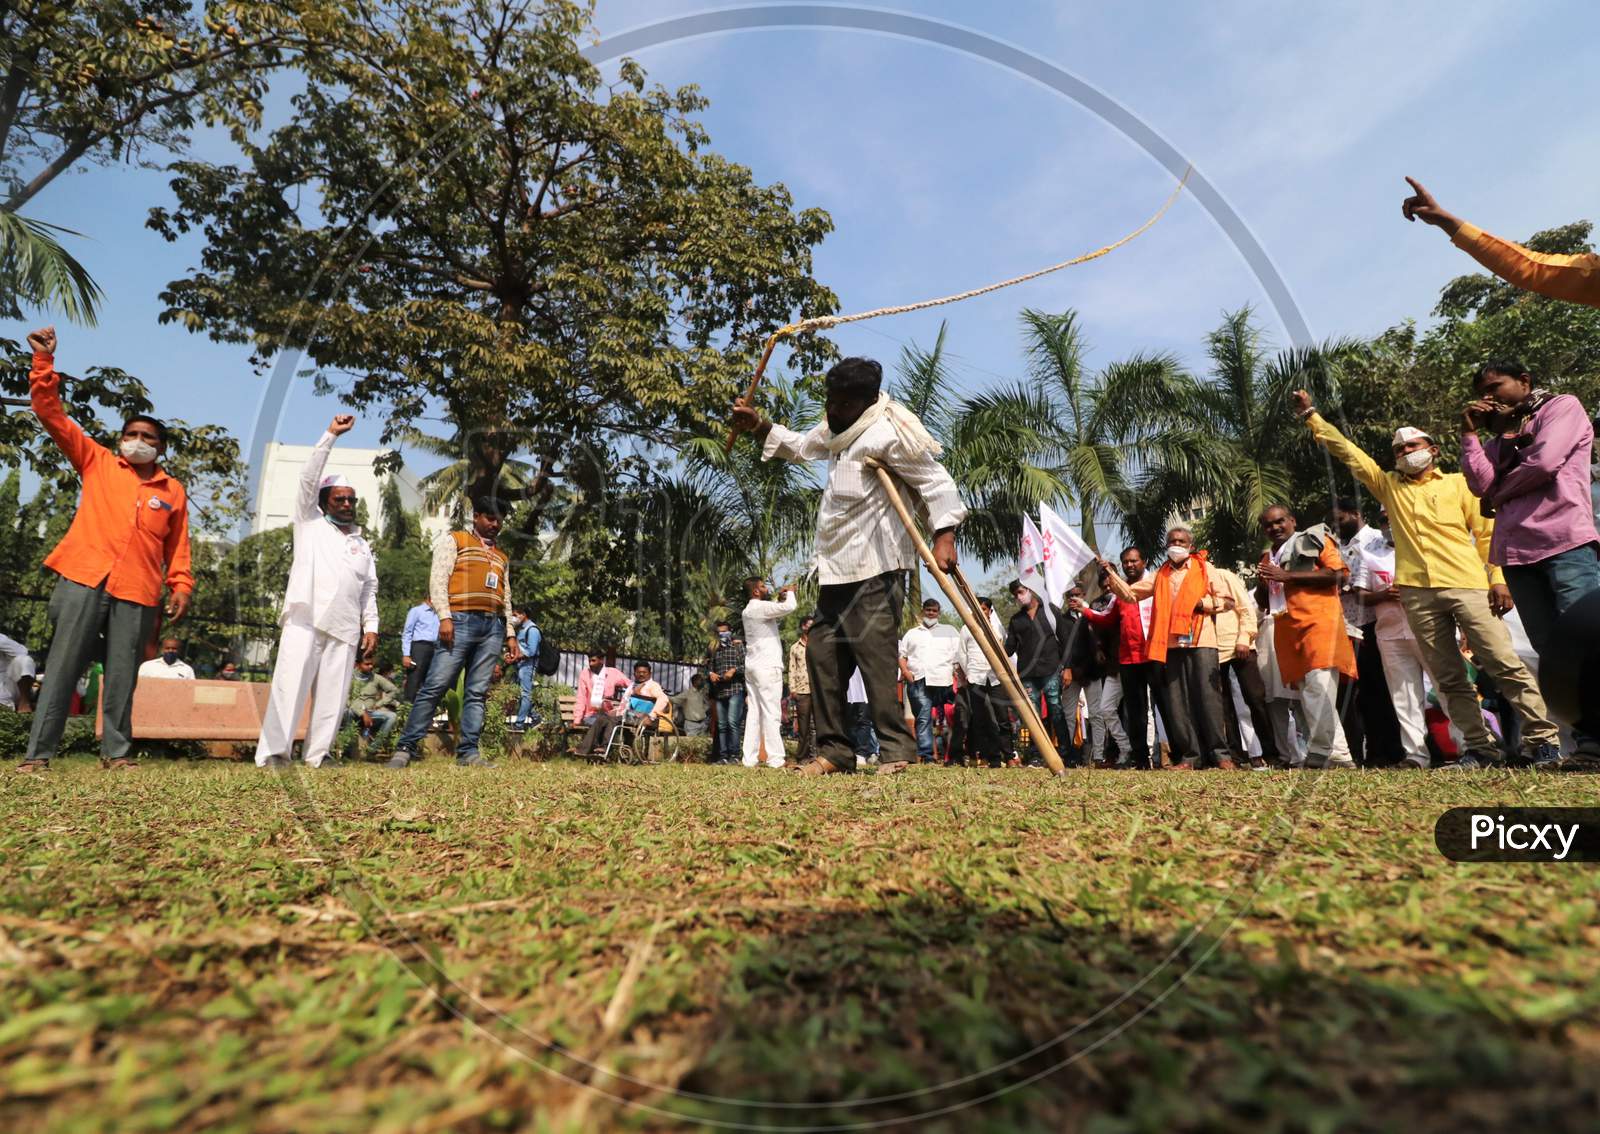 A man demonstrates his skills during a protest of farmers and members of various agricultural organisations against new farm laws passed by India's parliament, in Mumbai, India, December, 2020.